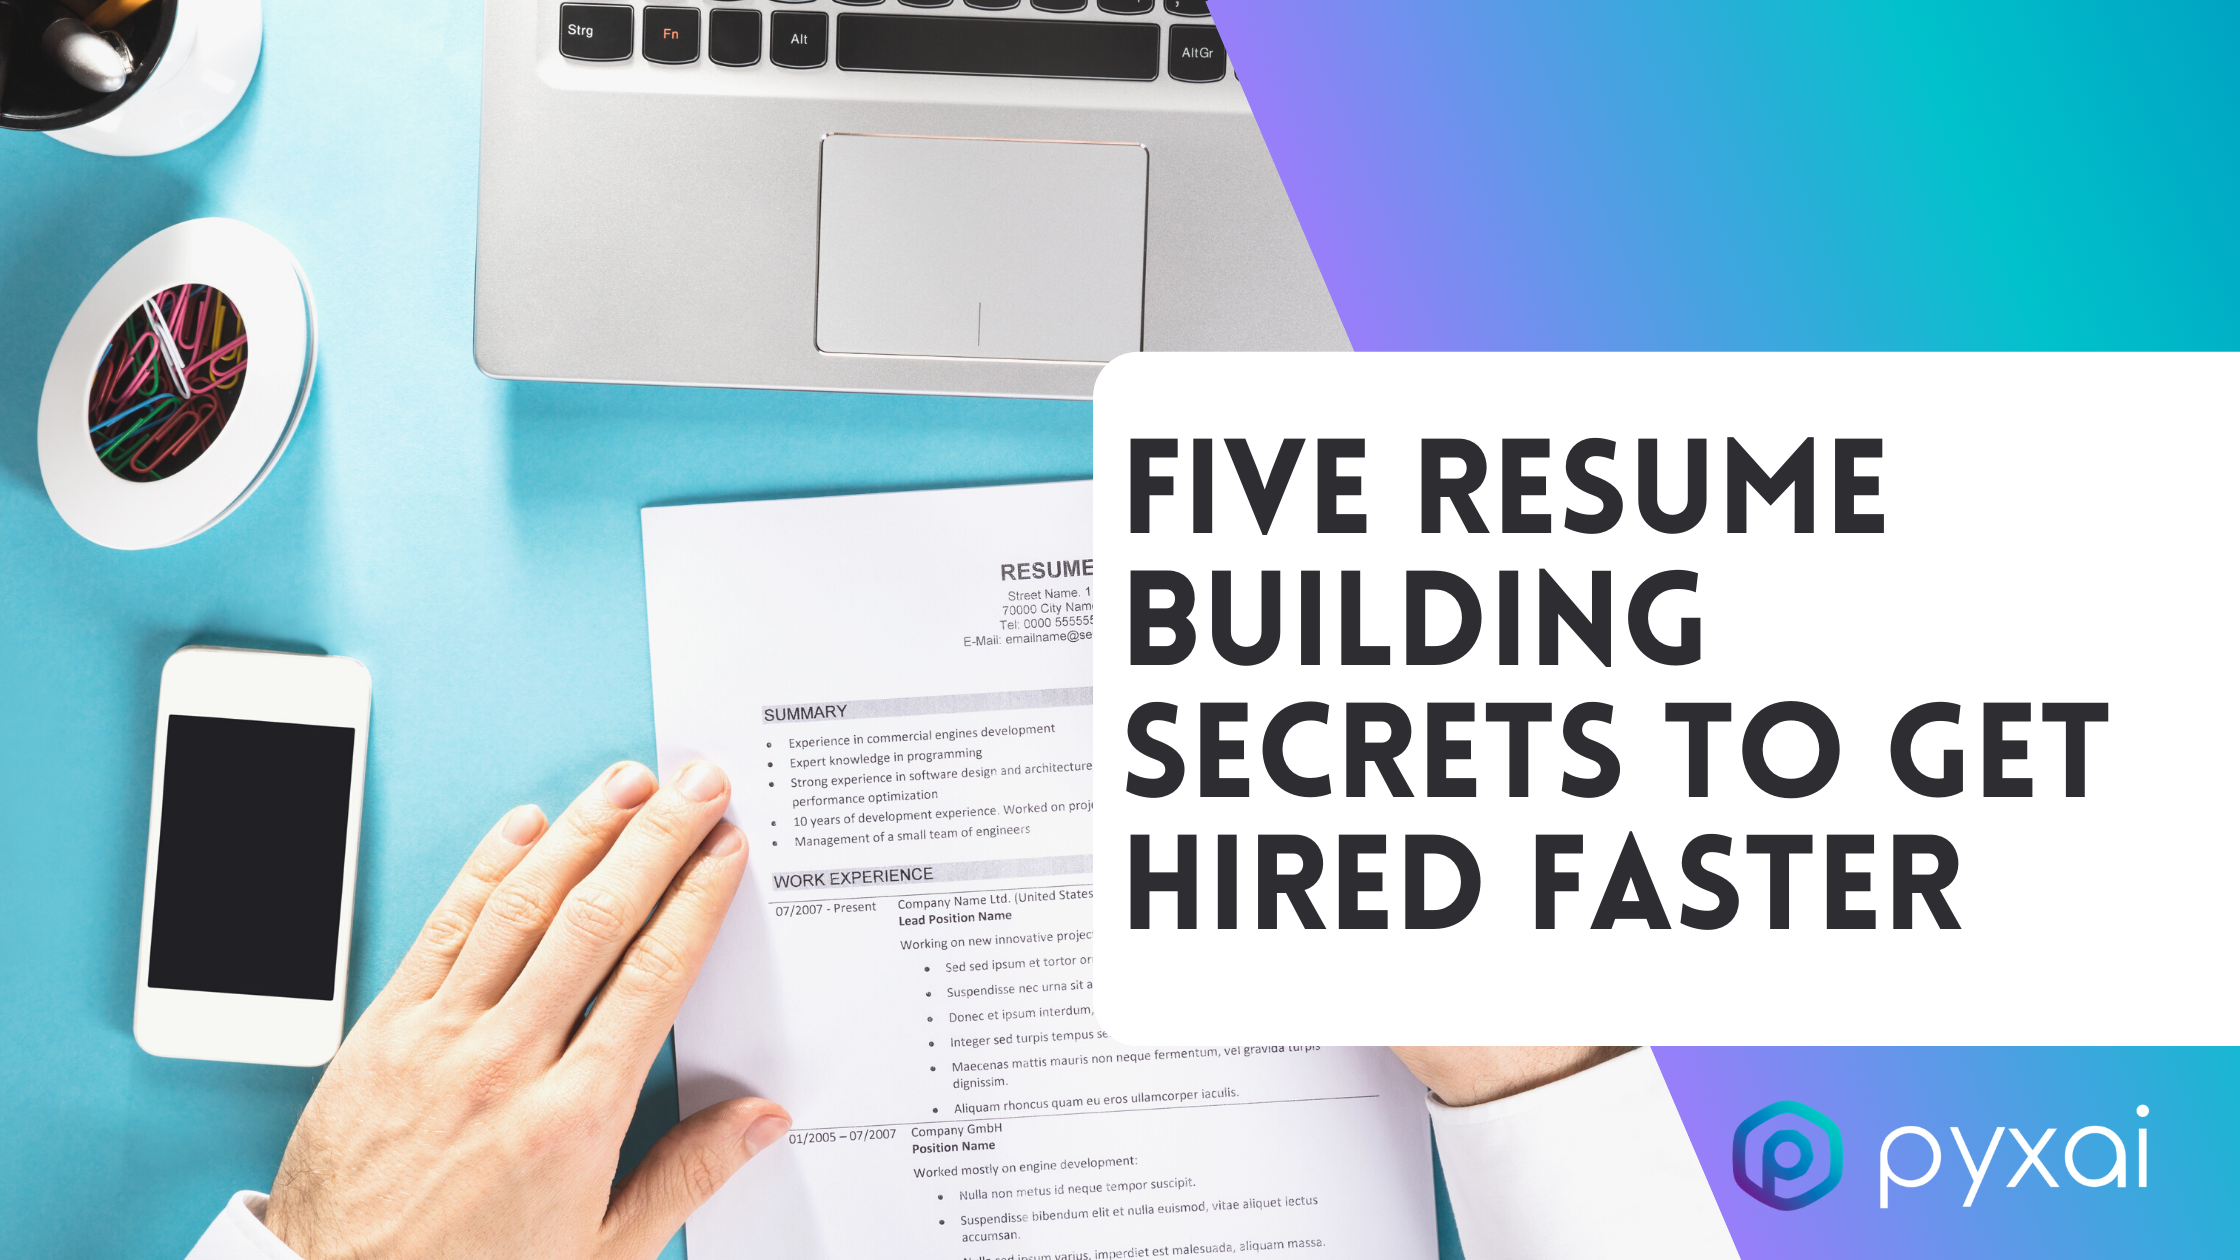 Five resume building secrets to get hired faster